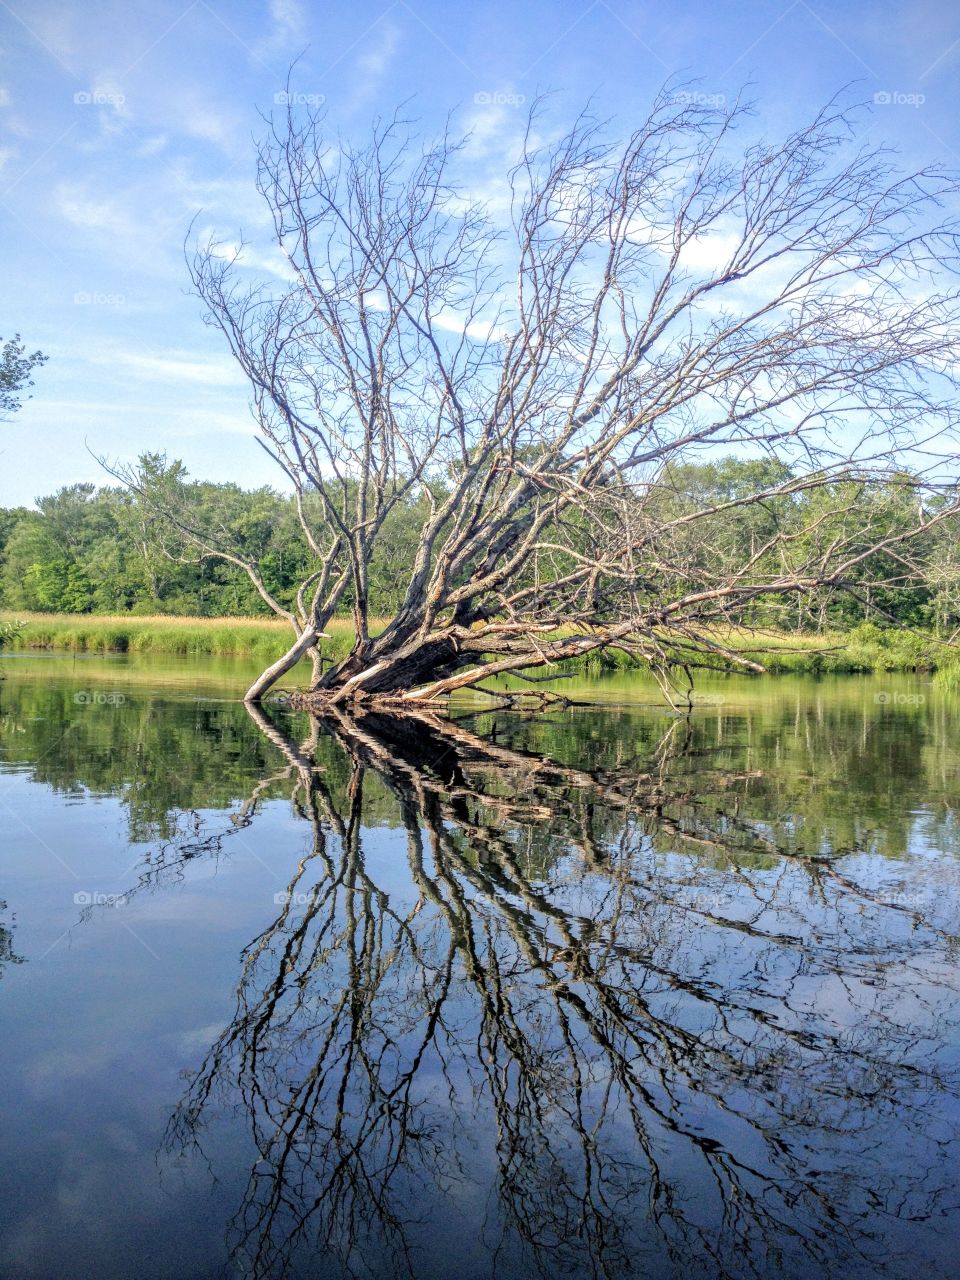 Mirror on the water